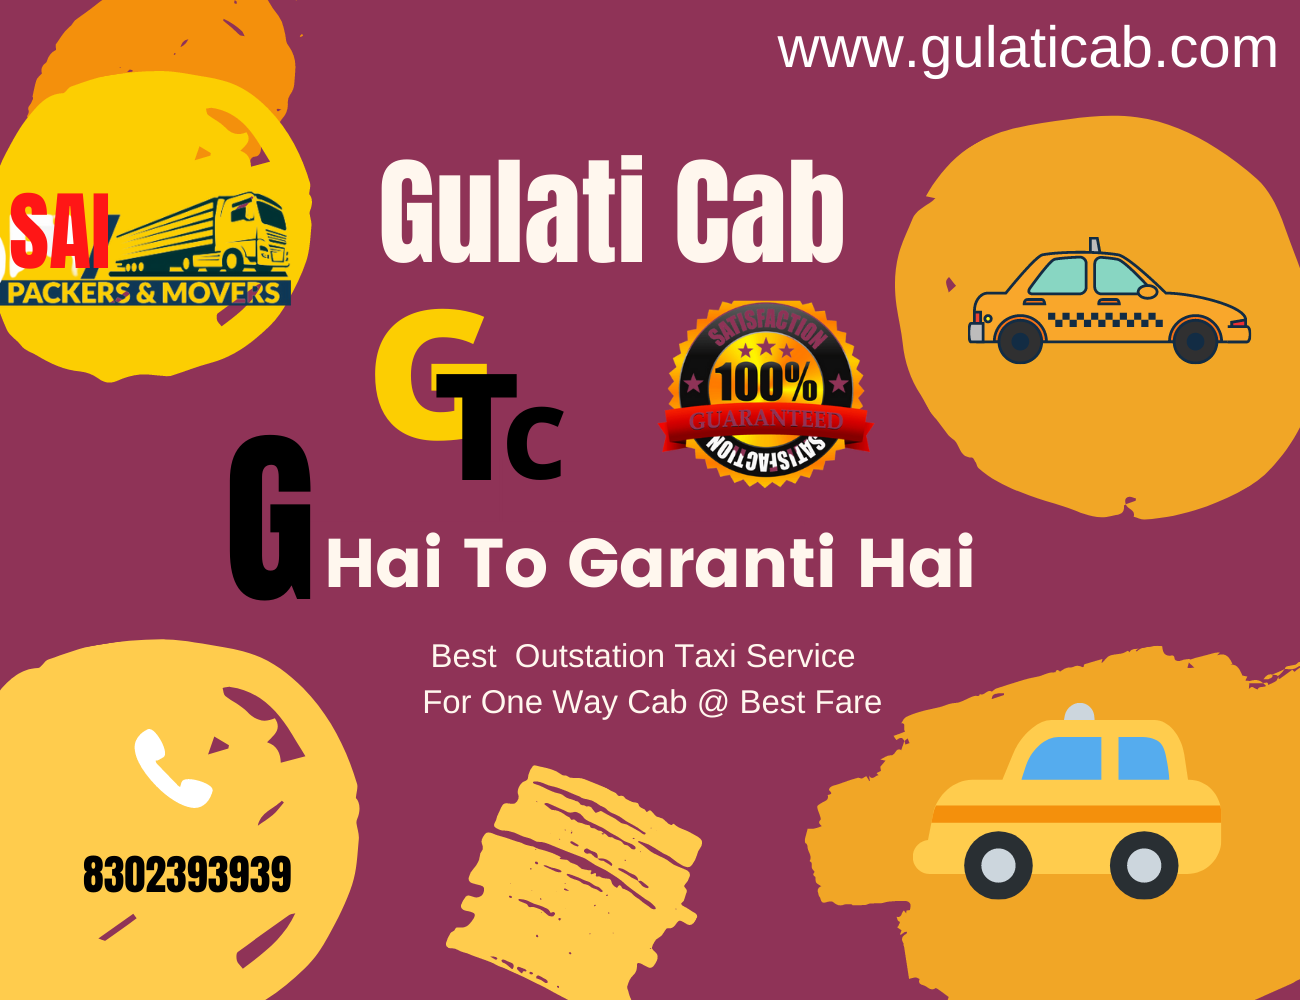 Online Cab Booking | Outstation Taxi Service | Rental Car In Bareilly For One Way Cab & Round Trips Taxi 24x7